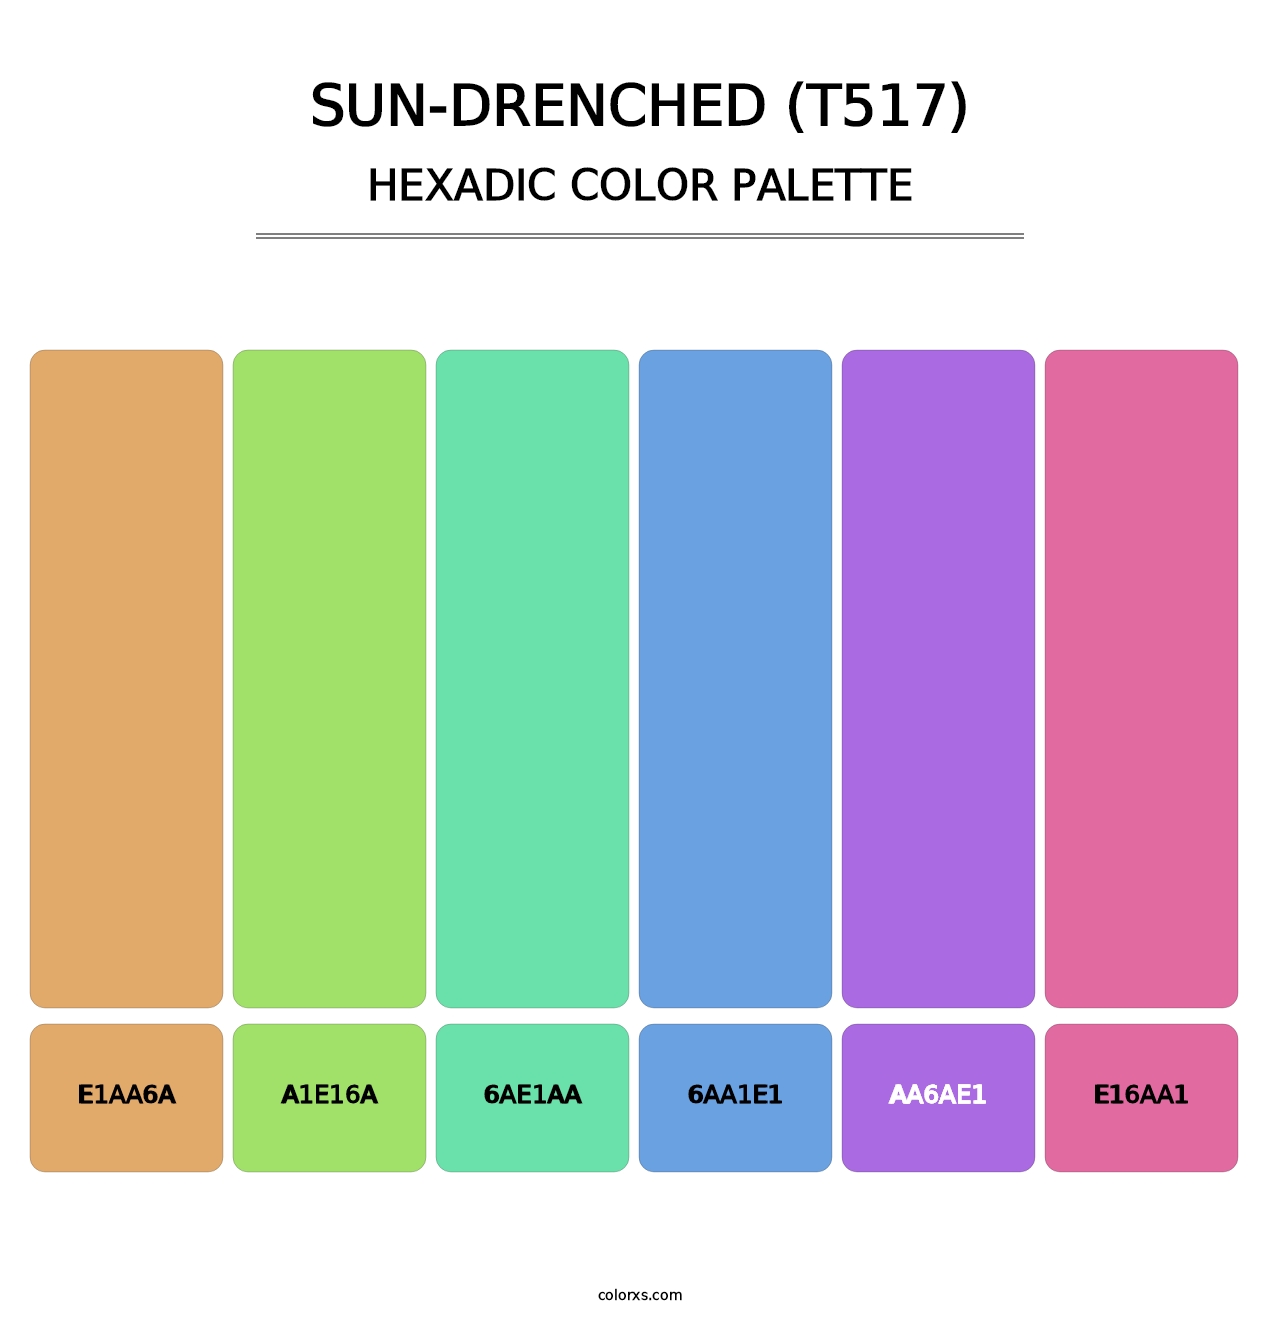 Sun-Drenched (T517) - Hexadic Color Palette